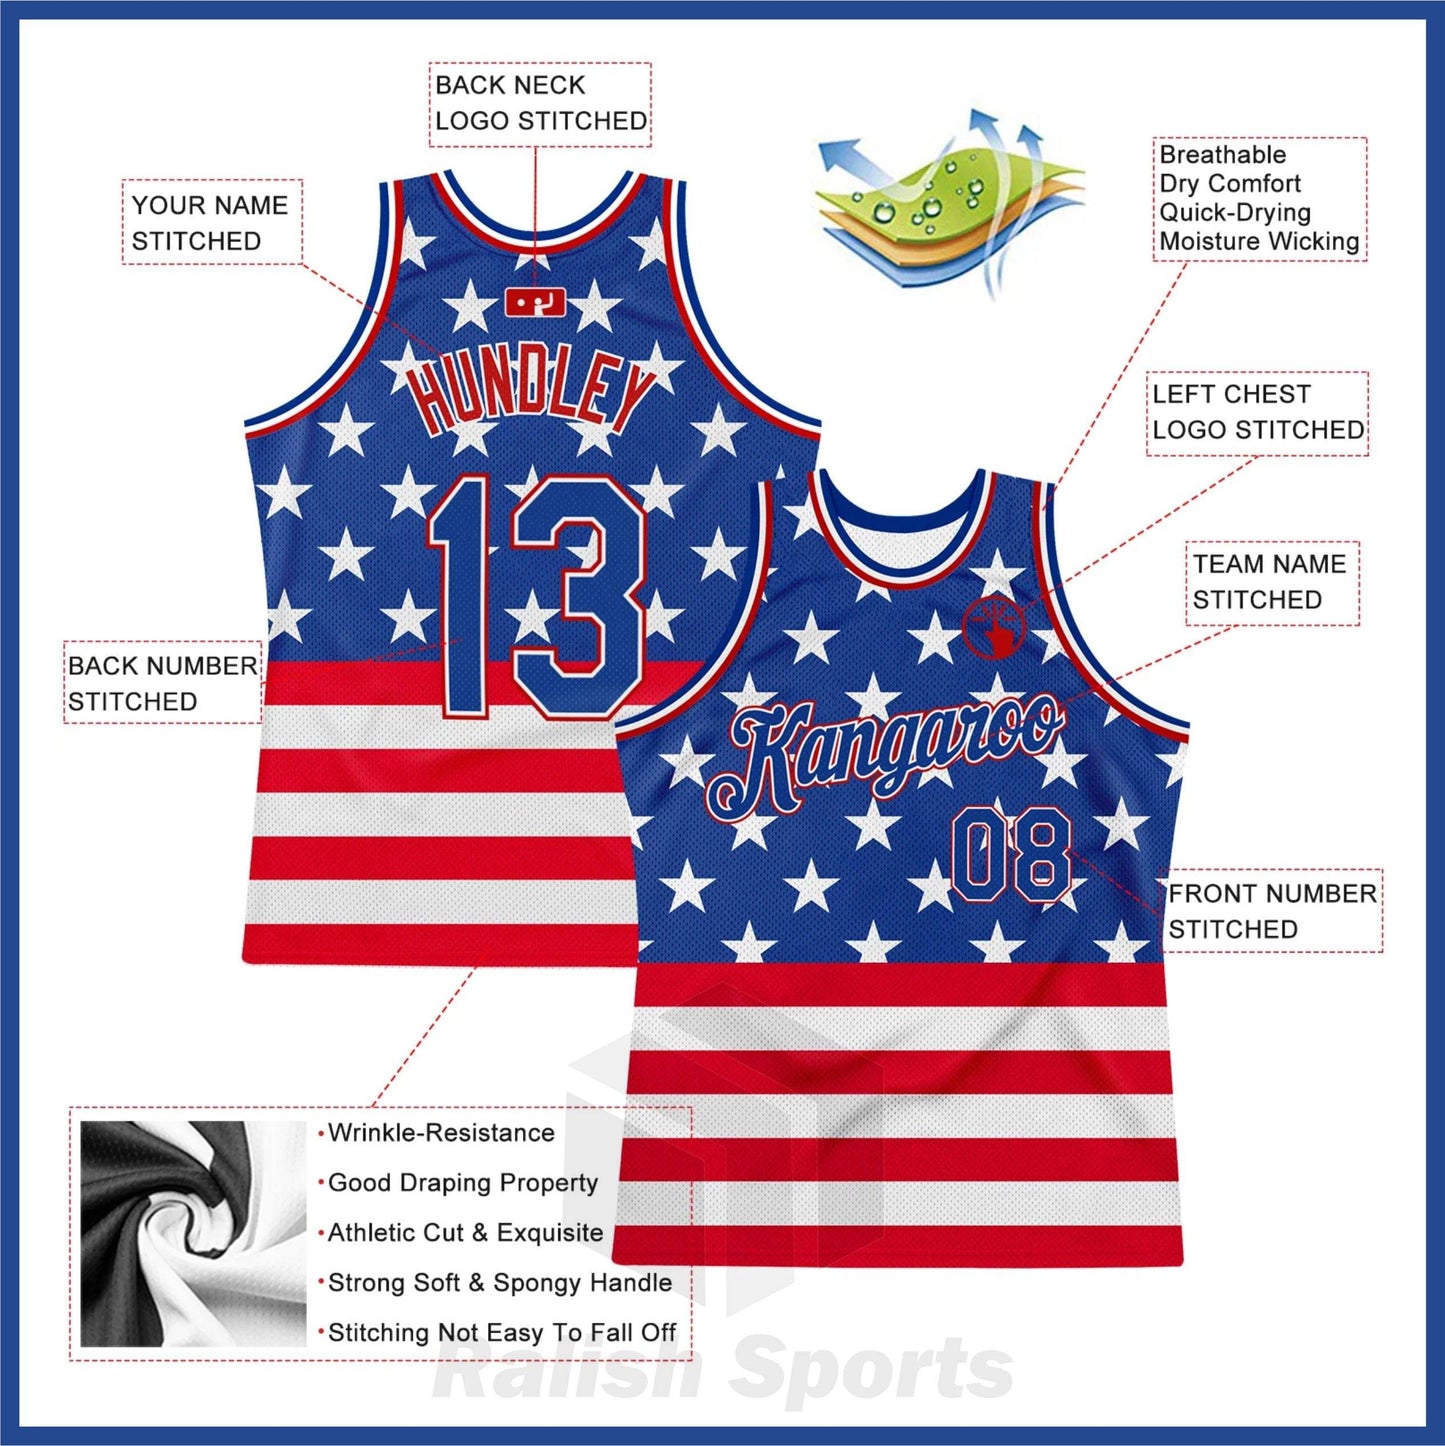 Custom Royal Royal-Red 3D Pattern Design American Flag Authentic Basketball Jersey - Ralish Sports